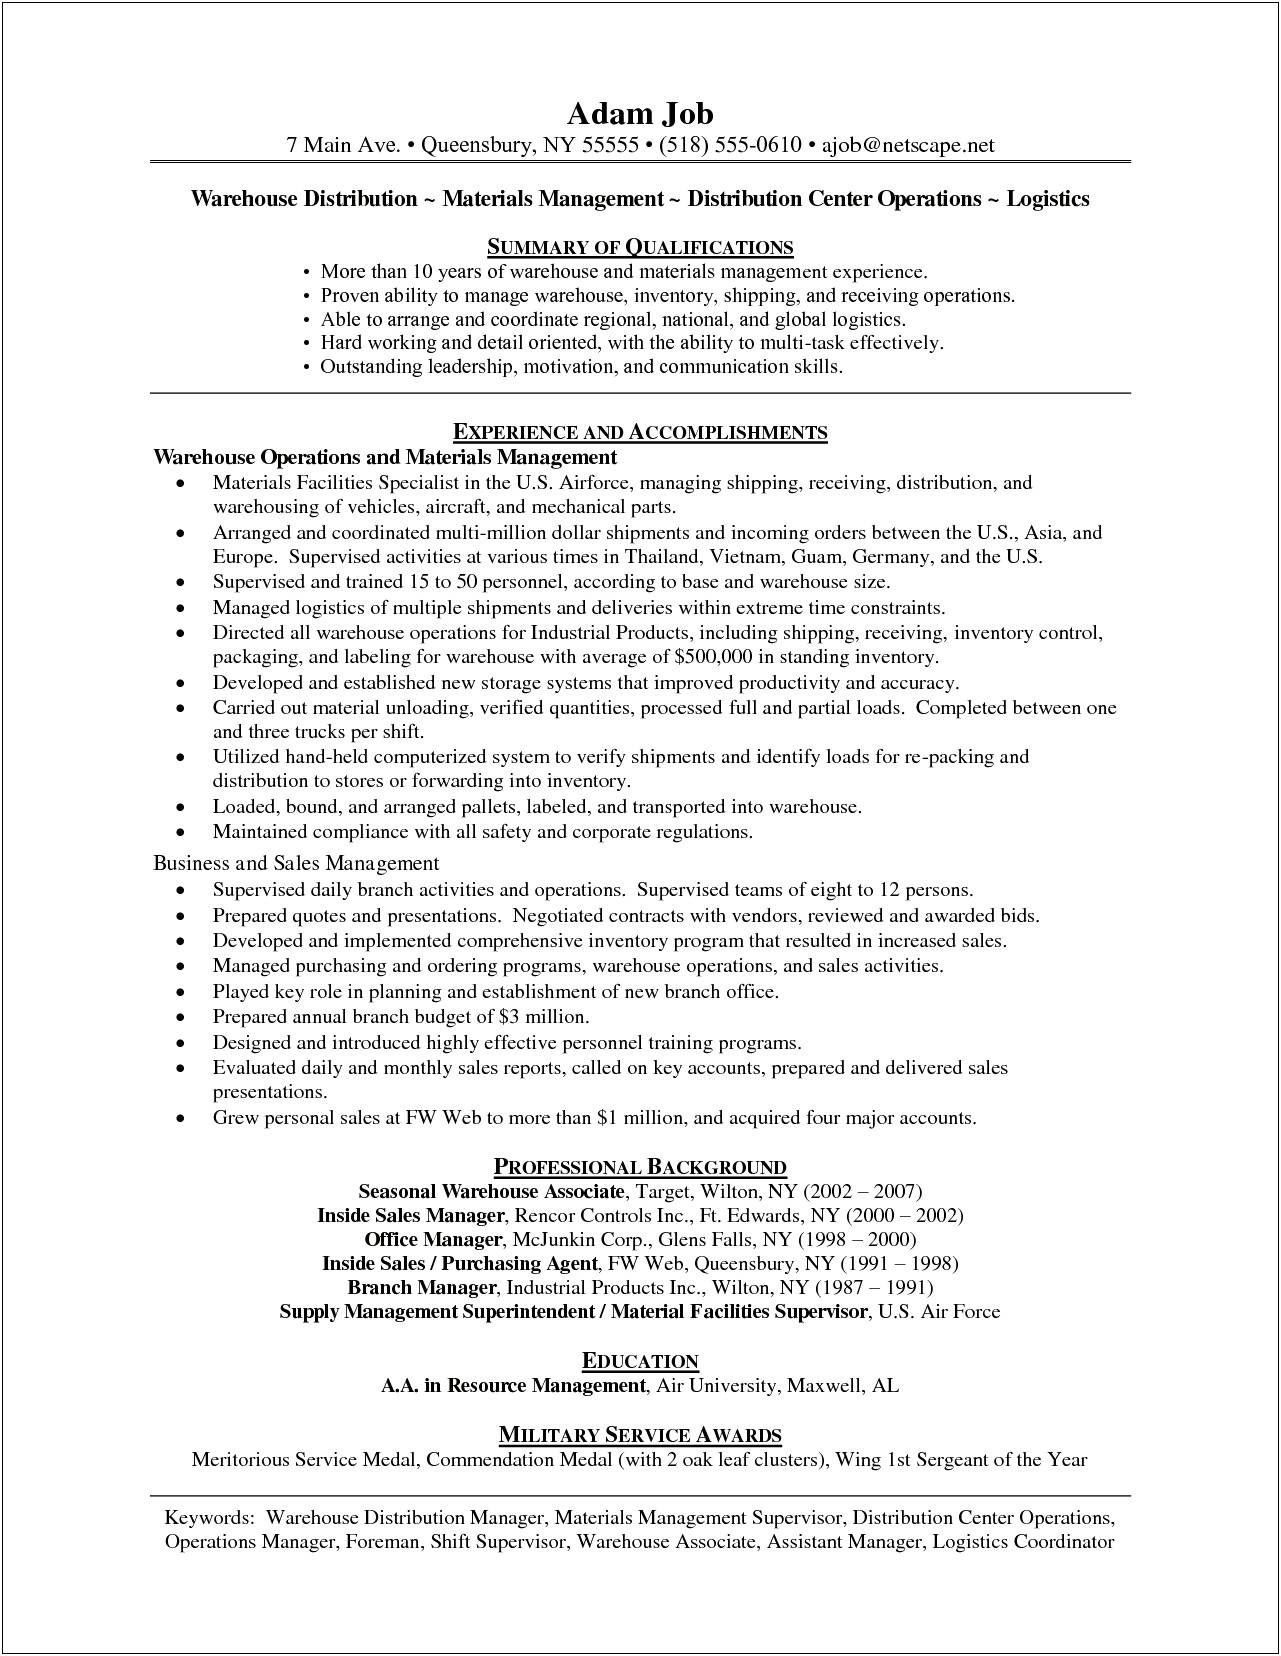 Assistant Manager Operations Resume Format